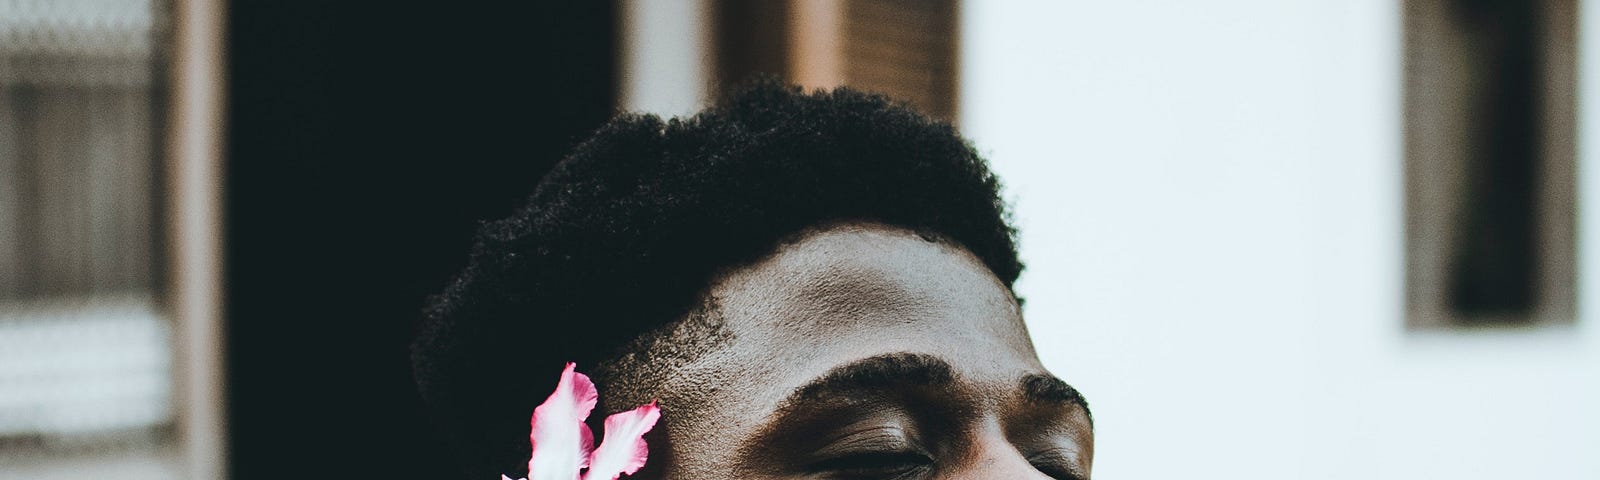 A beautiful Black man with a flower behind his ear.